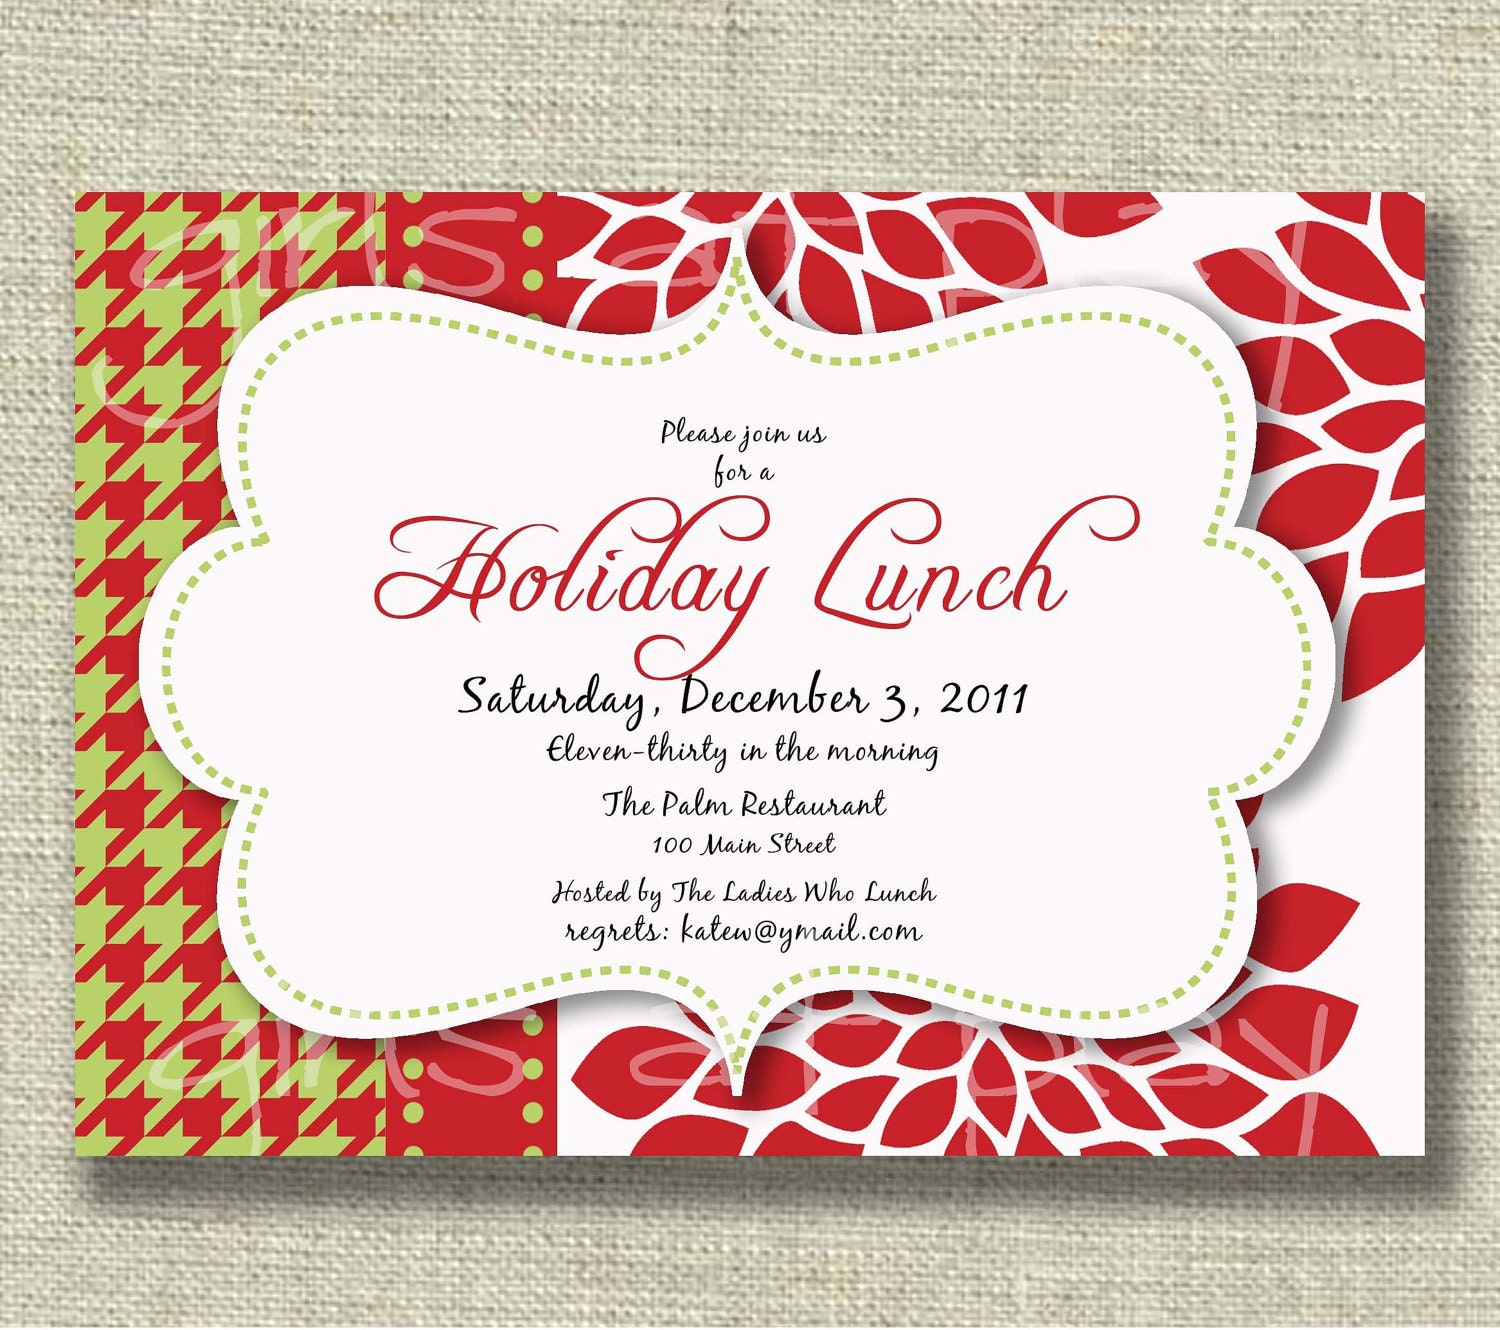 Christmas Holiday Invitation Luncheon Open House By Girlsatplay